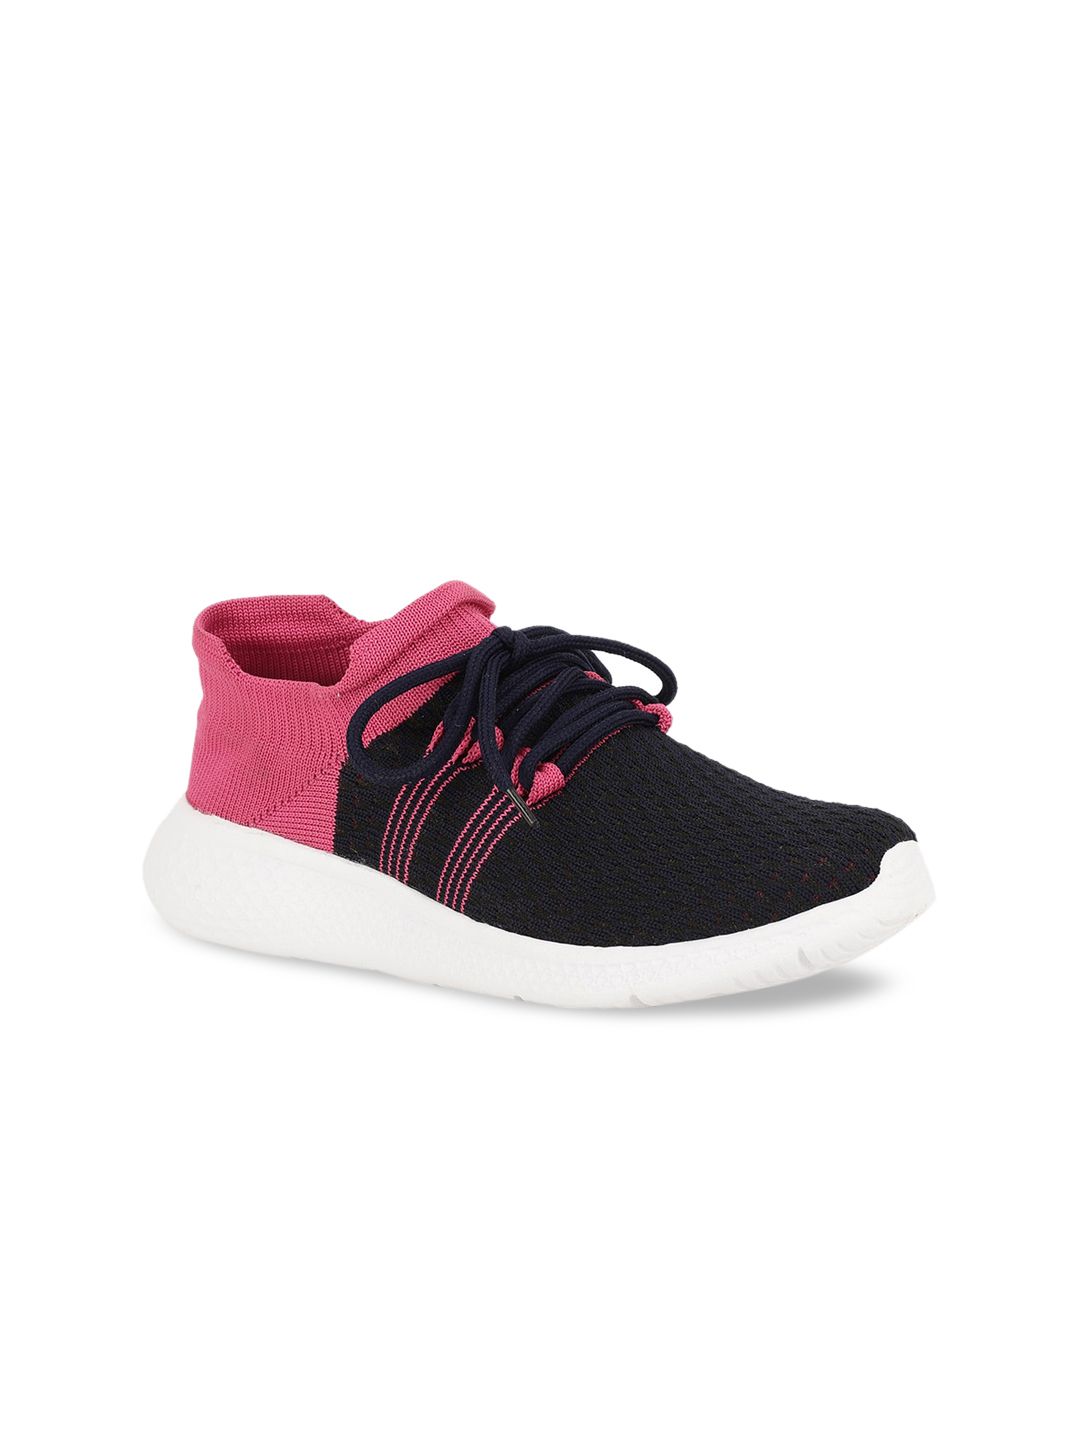 HERE&NOW Women Black Woven Design Sneakers Price in India